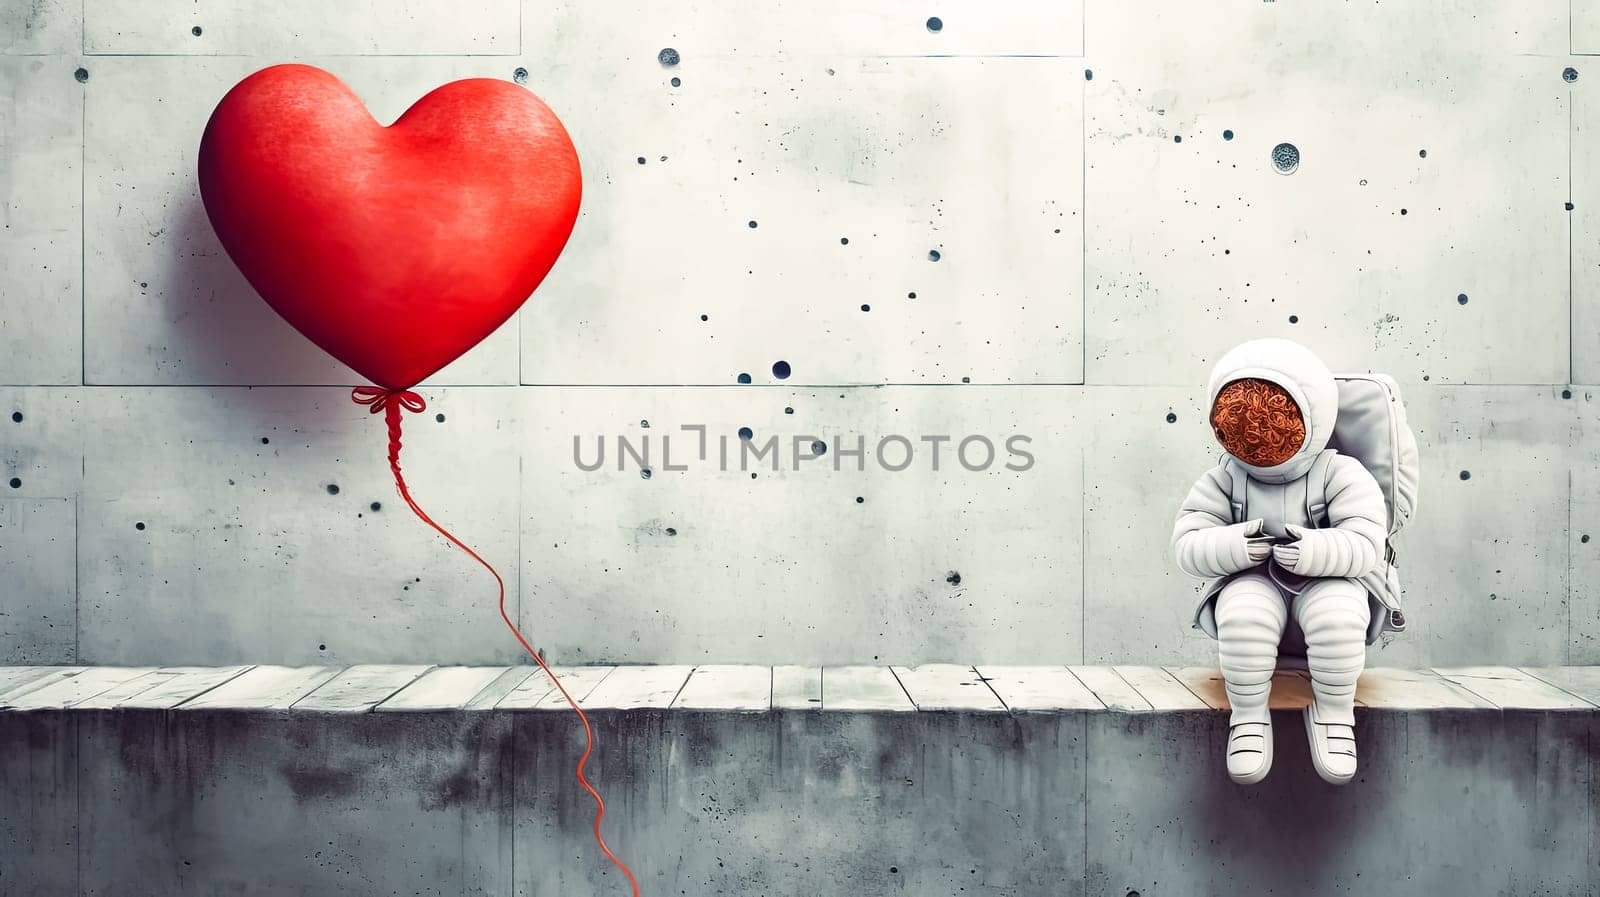 Astronaut suited kid beside a heart balloon by Alla_Morozova93